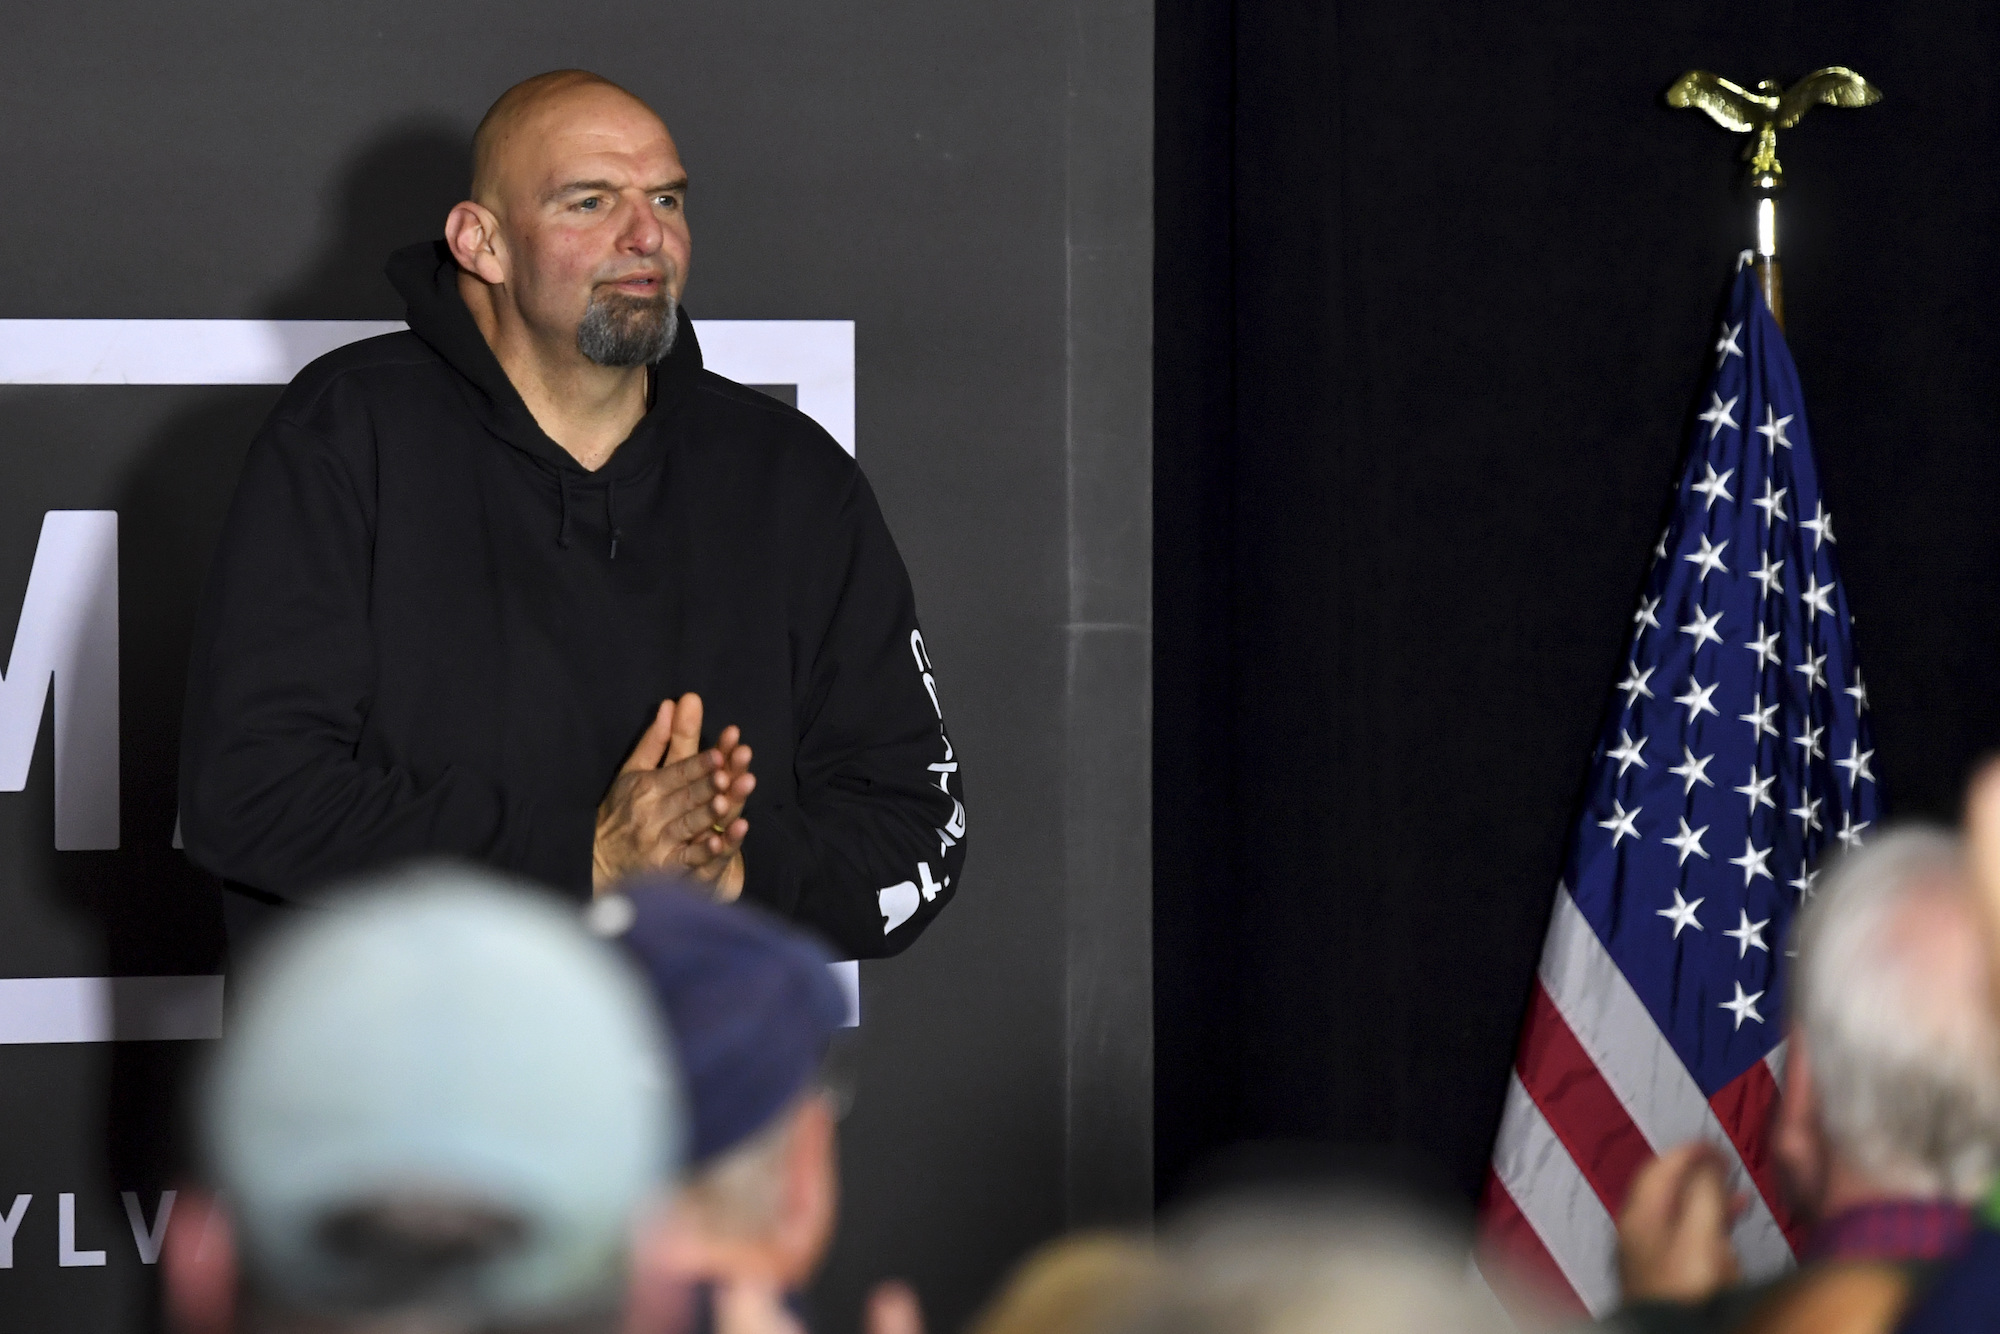 Fetterman at a campaign event in Wilkes-Barre, Pennsylvania, on Thursday.